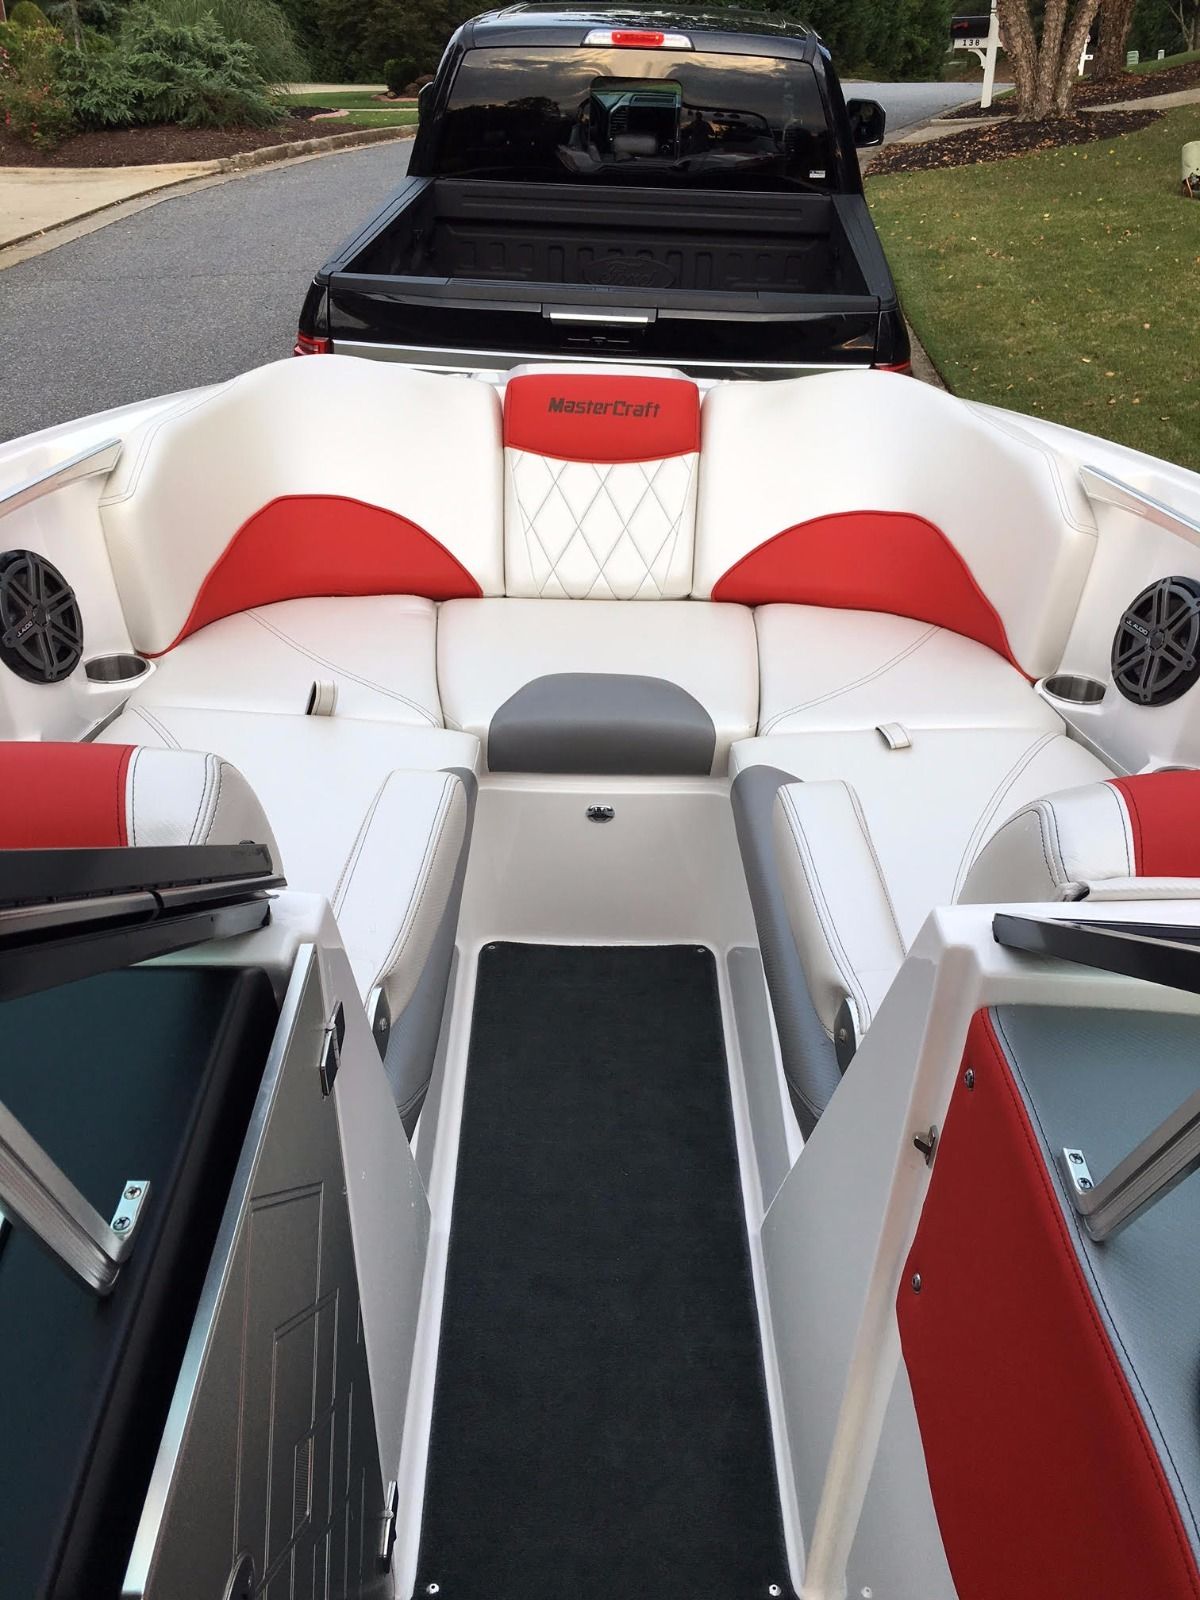 Mastercraft X46 2014 for sale for $98,000 - Boats-from-USA.com